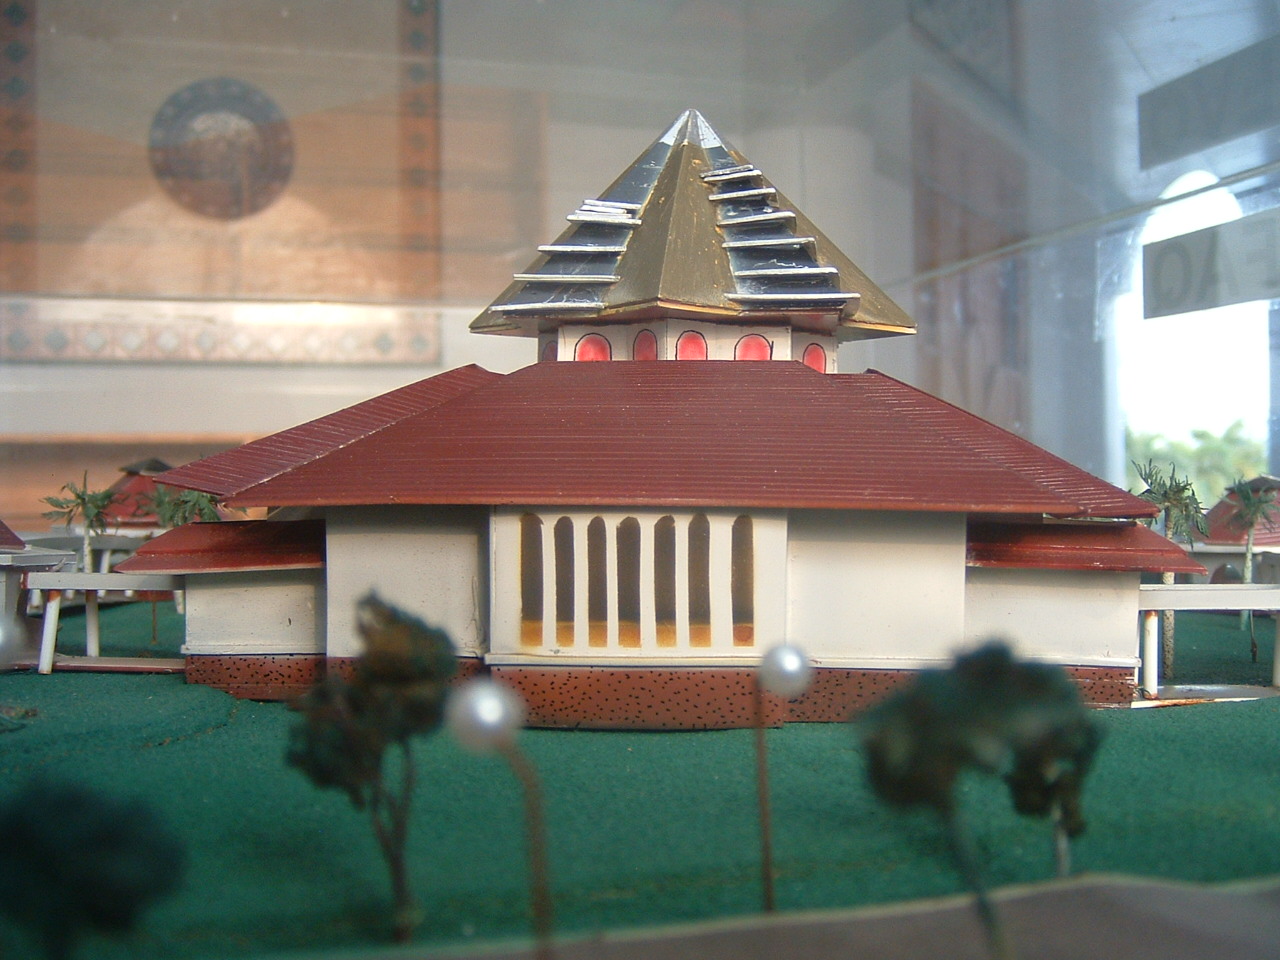 Detail view of west elevation of mosque model